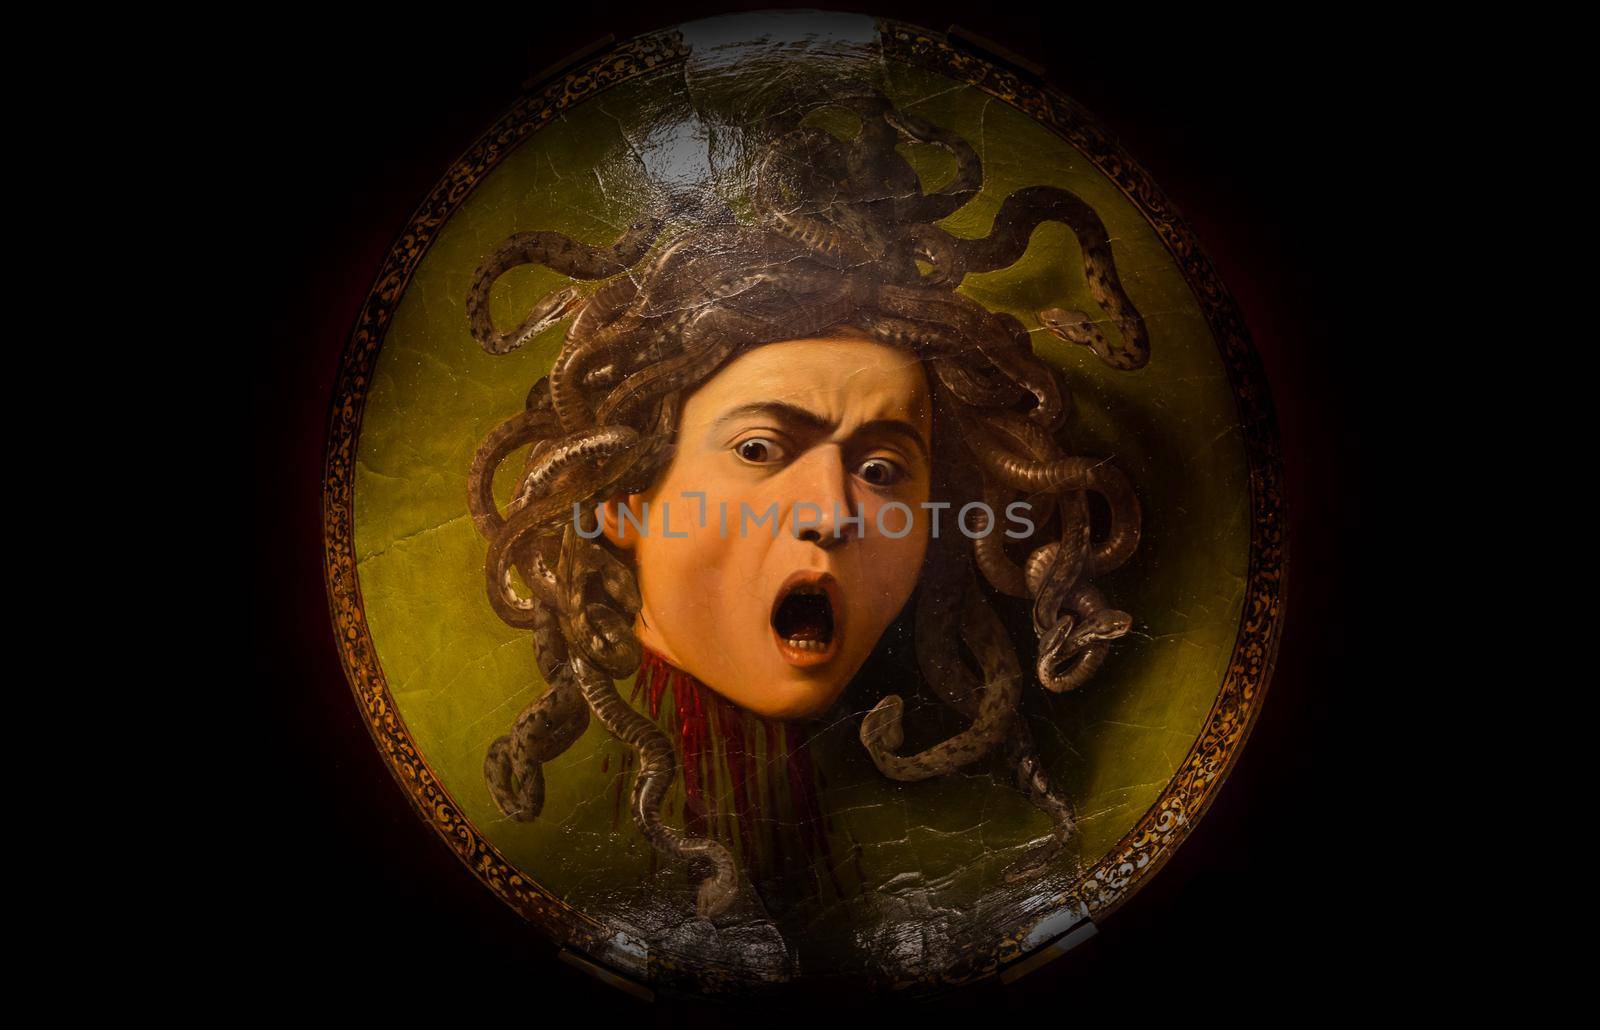 Florence, Italy - Circa August 2021: Medusa by Caravaggio, ca 1598 - oil on canvas. by Perseomedusa